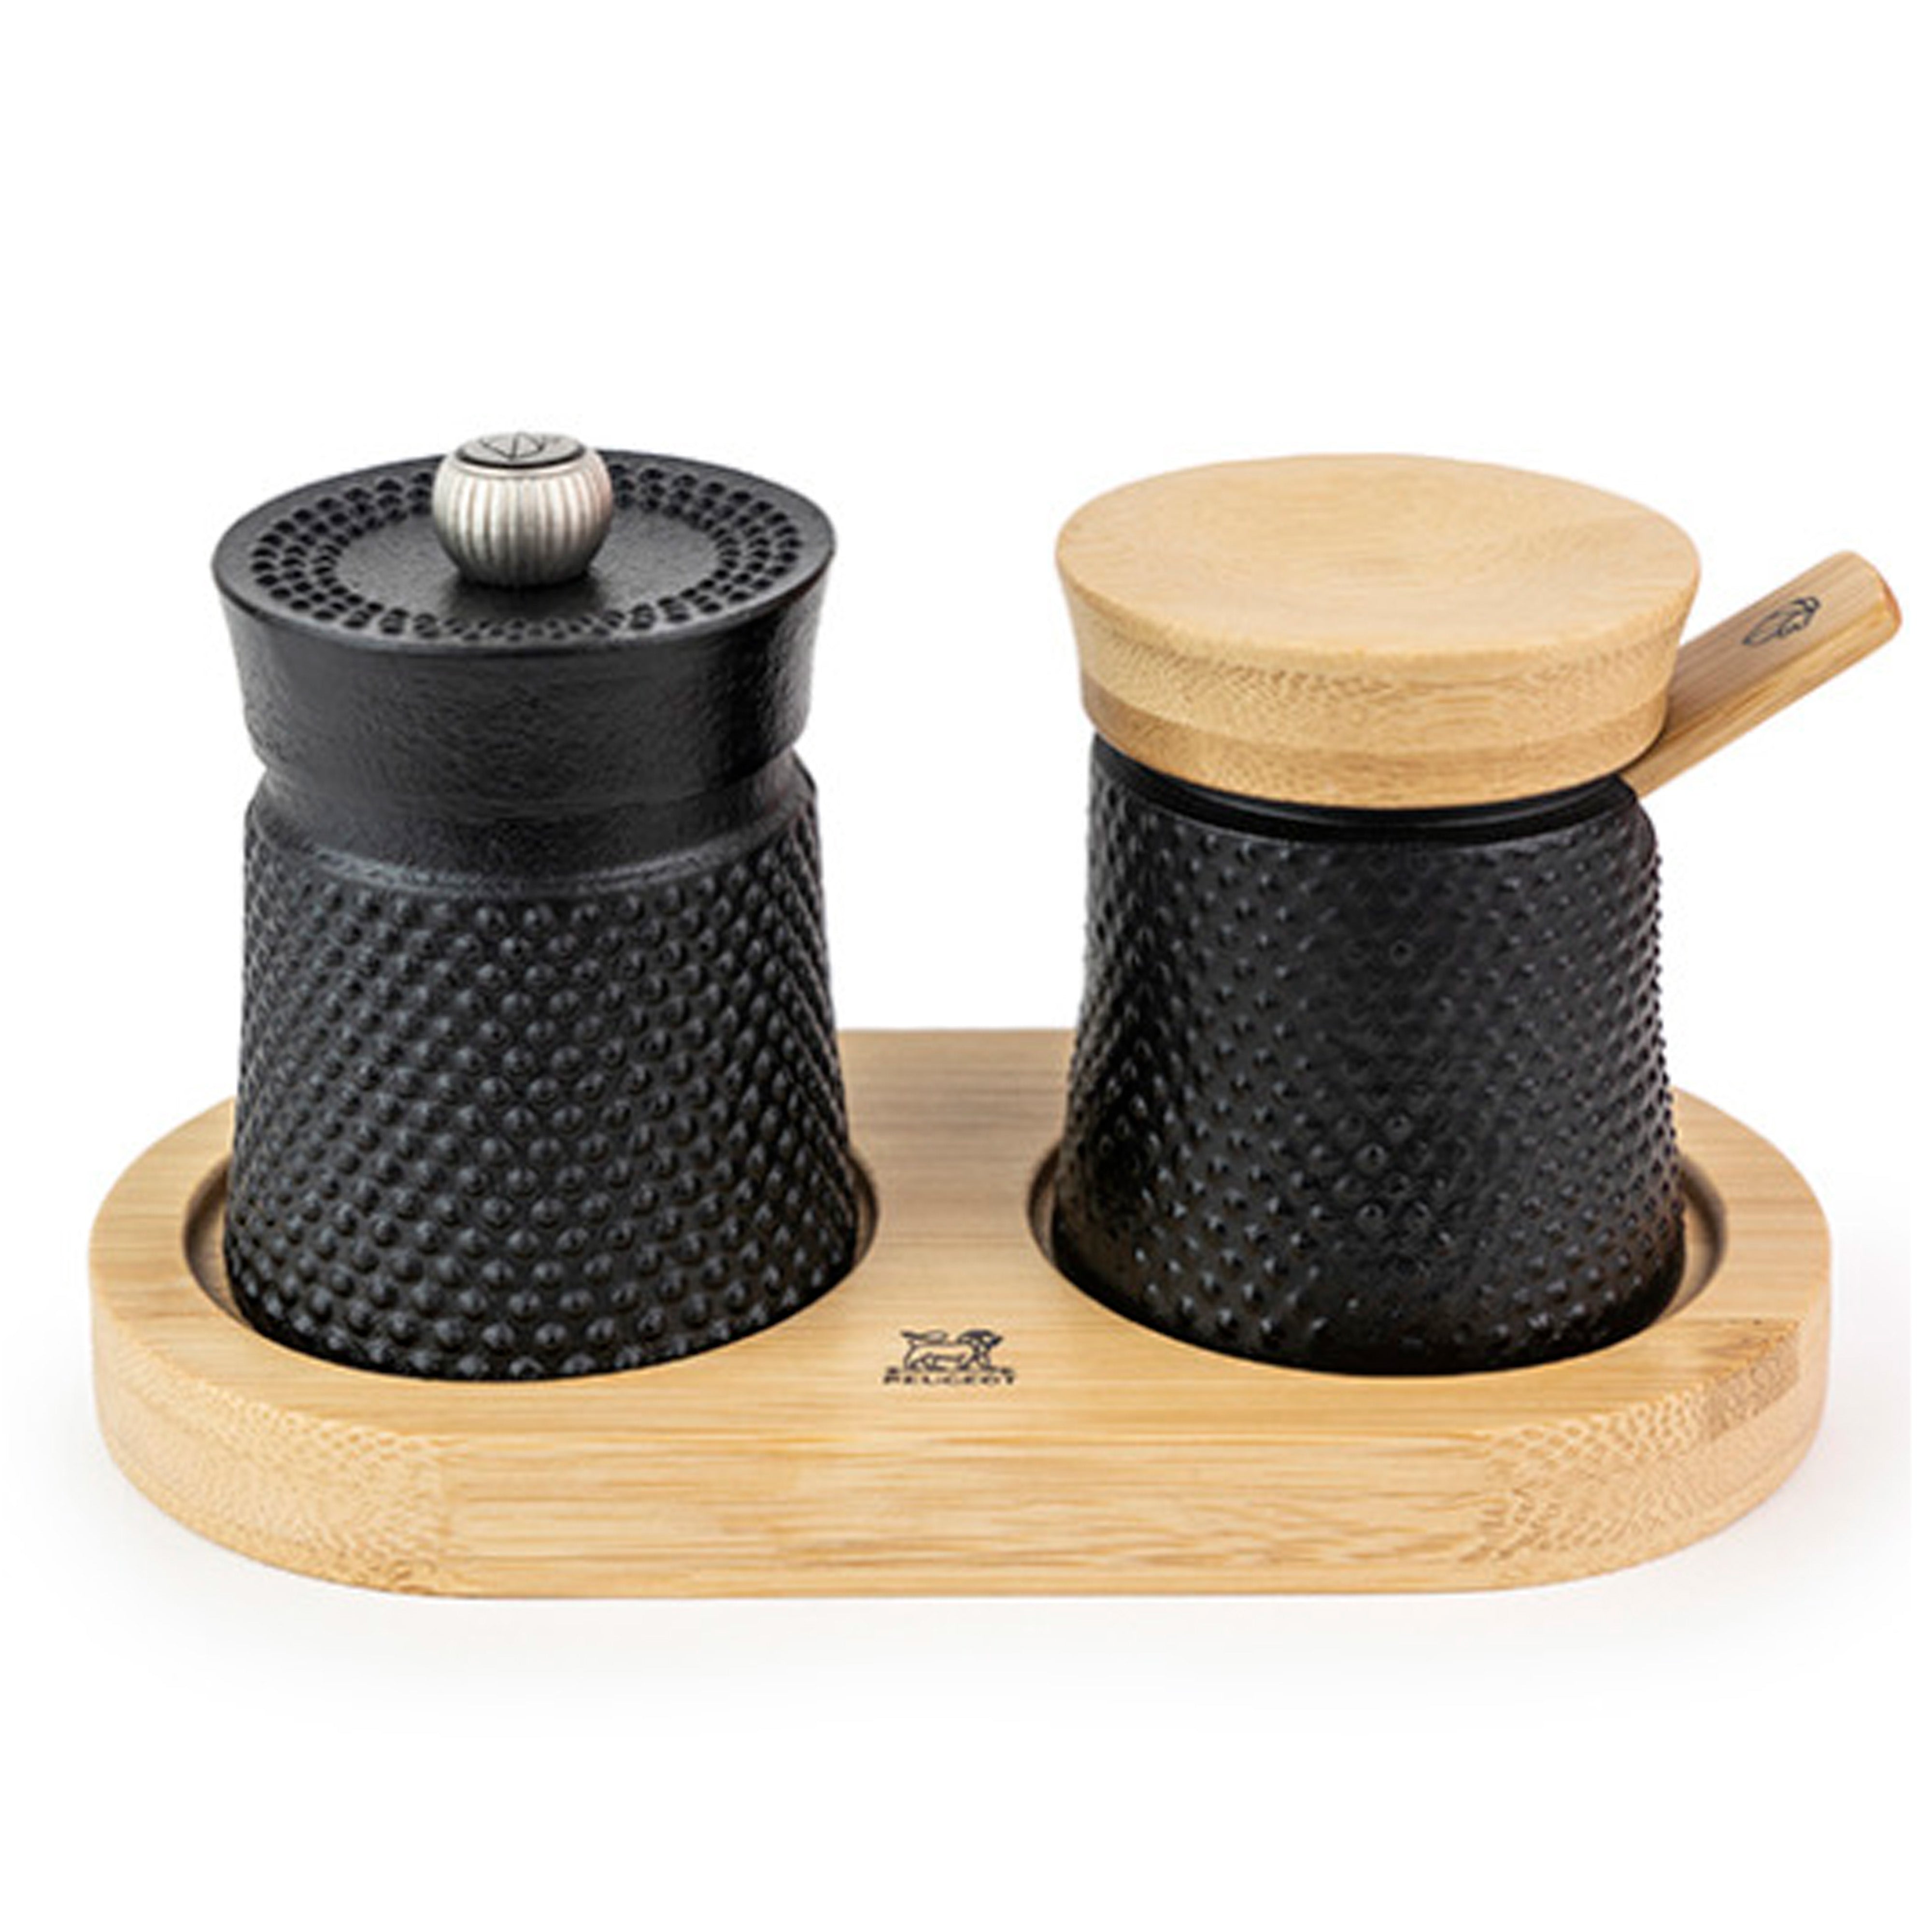 Turners Select Deluxe Pepper Mill Kit